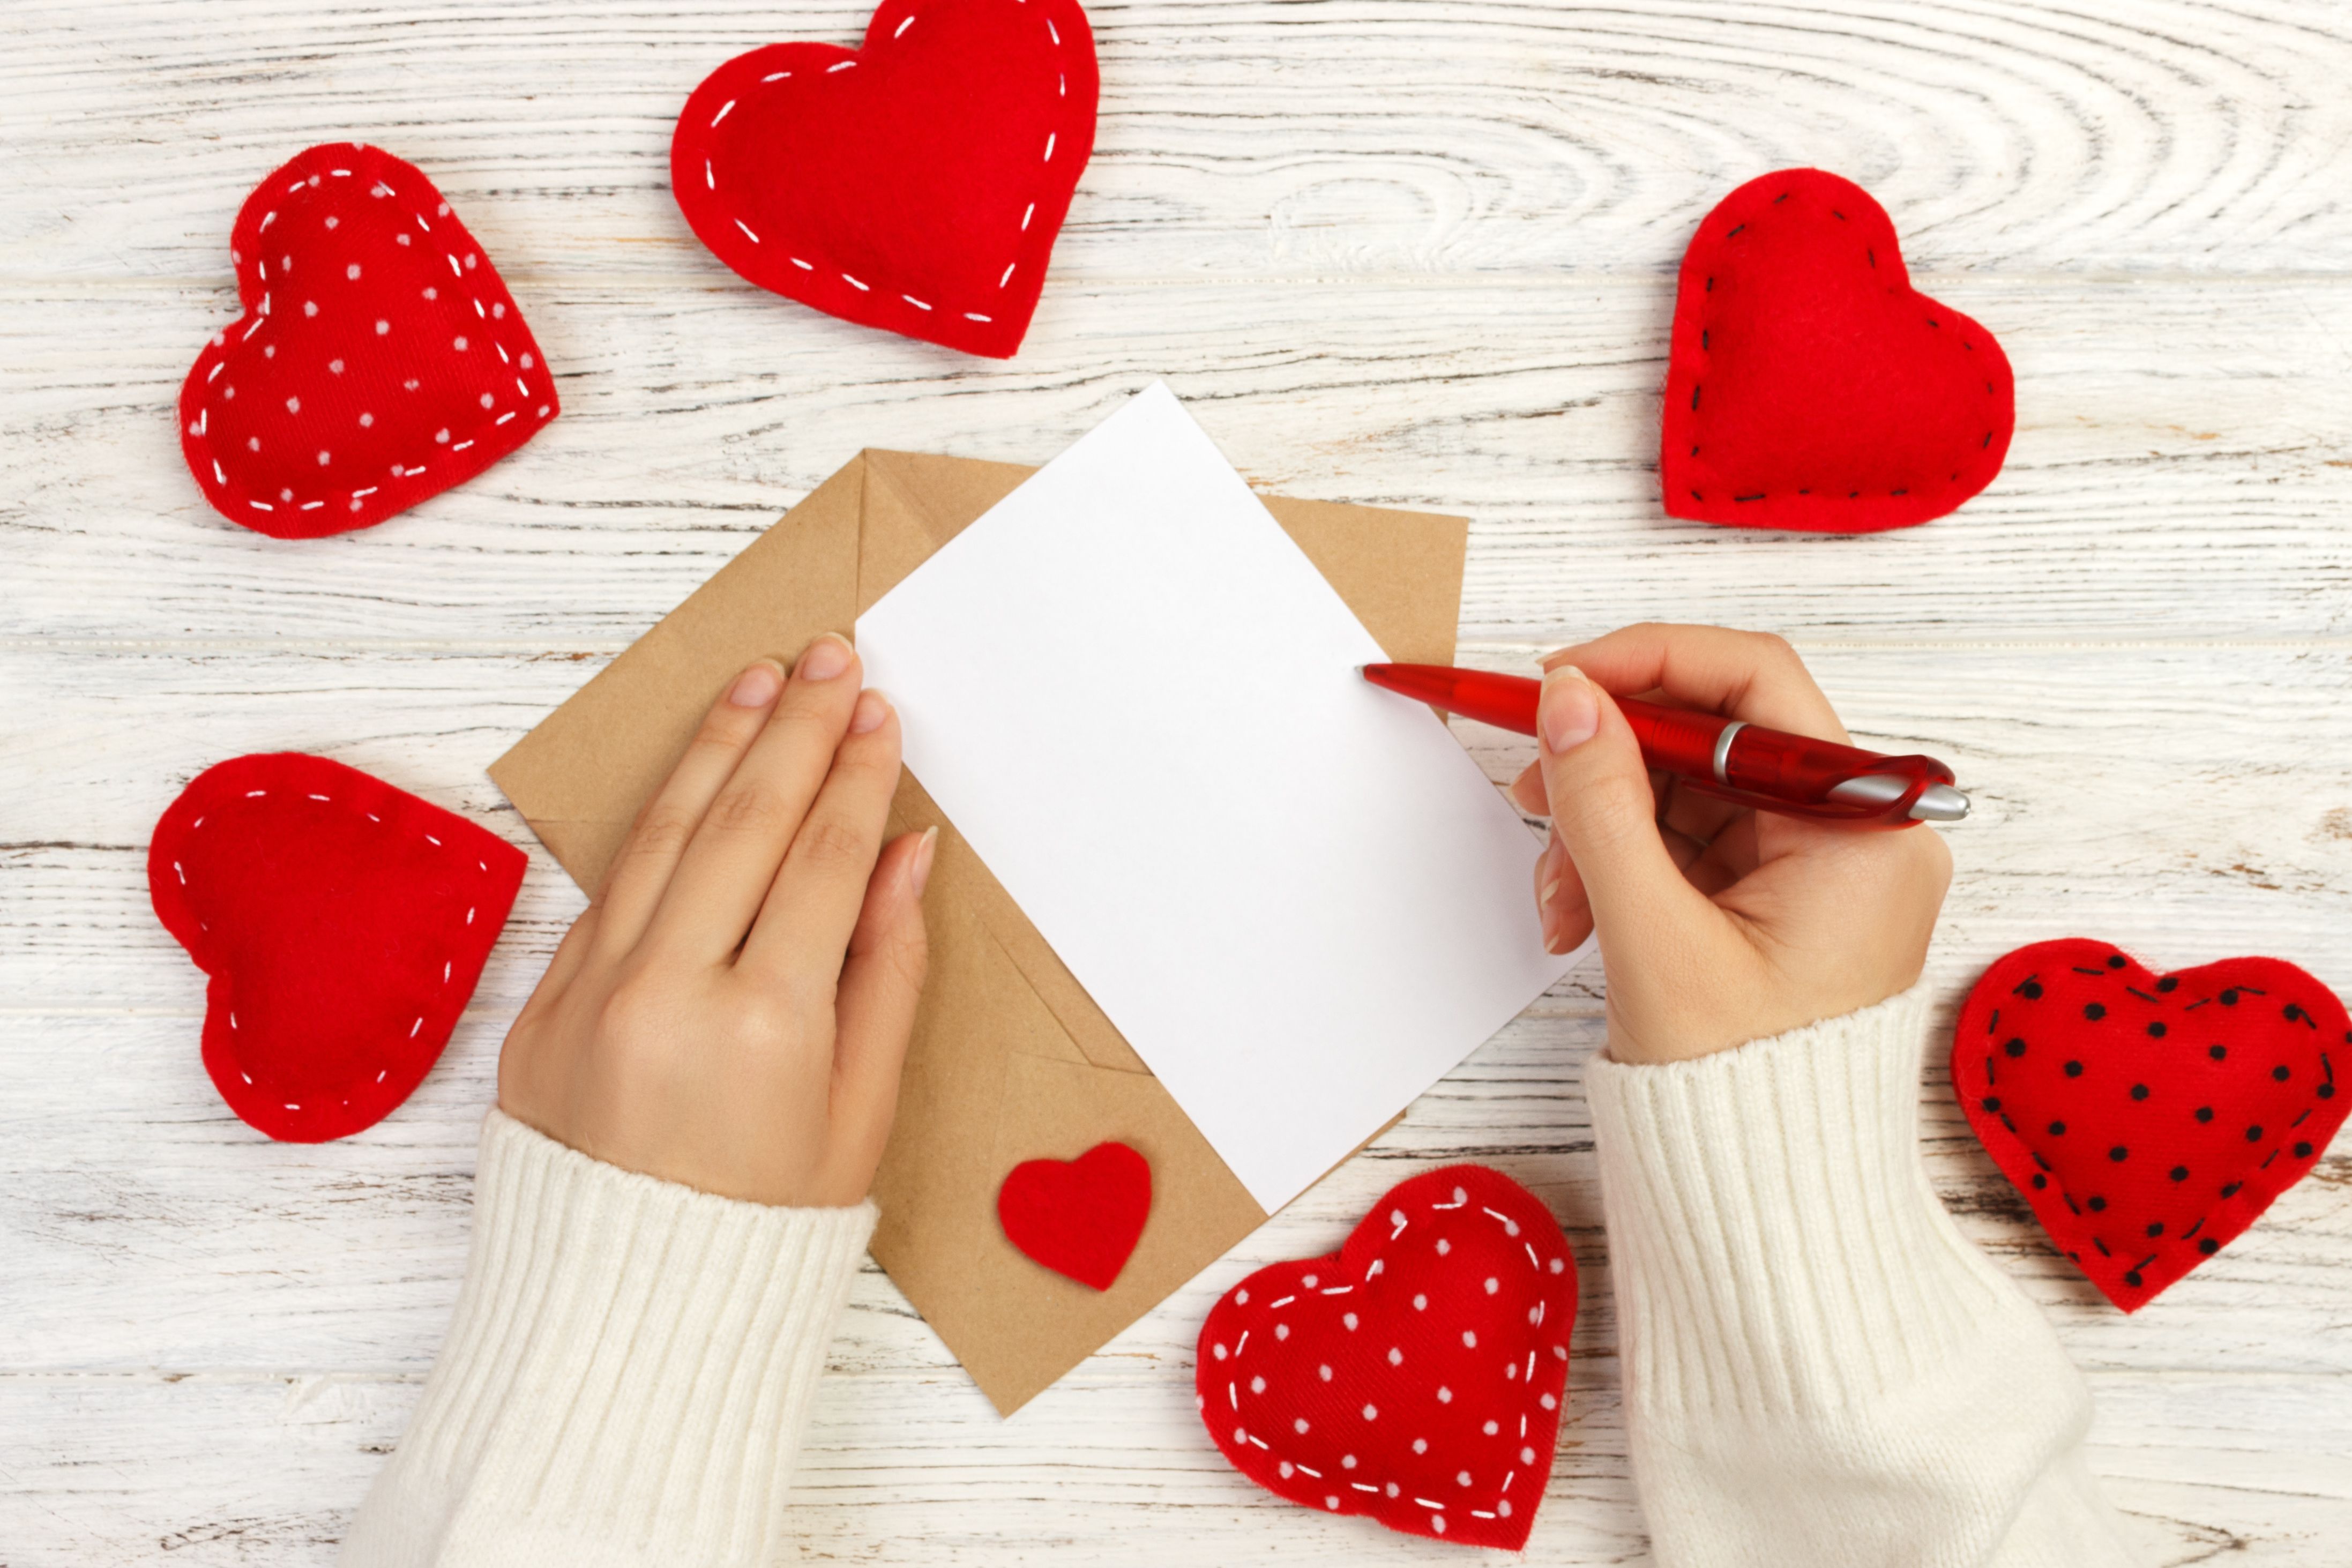 50 Best Valentine S Day Wishes Messages What To Write In A V Day Card I have read several stories and watched innumerable romantic movies but. what to write in a v day card